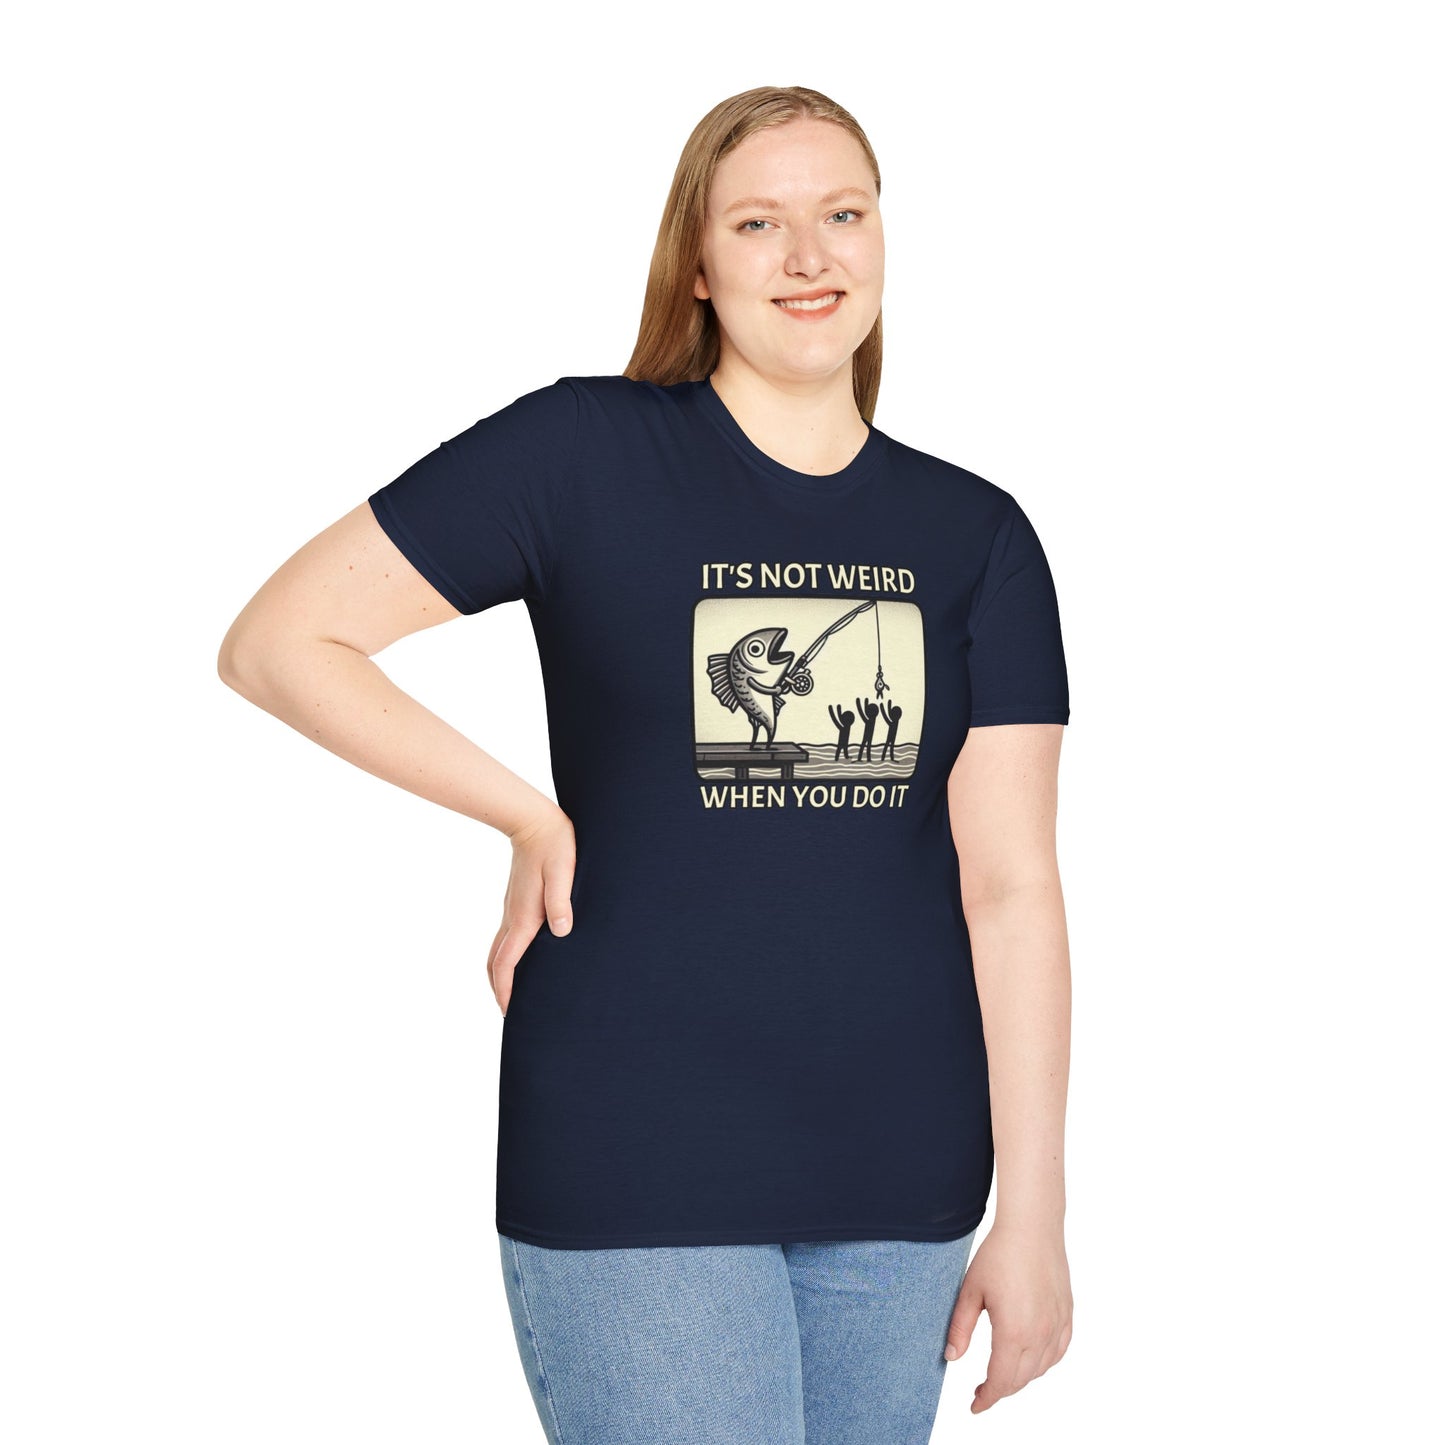 Fish Out of Water: Reeling in the Irony with Human Fishing Graphic T-shirt